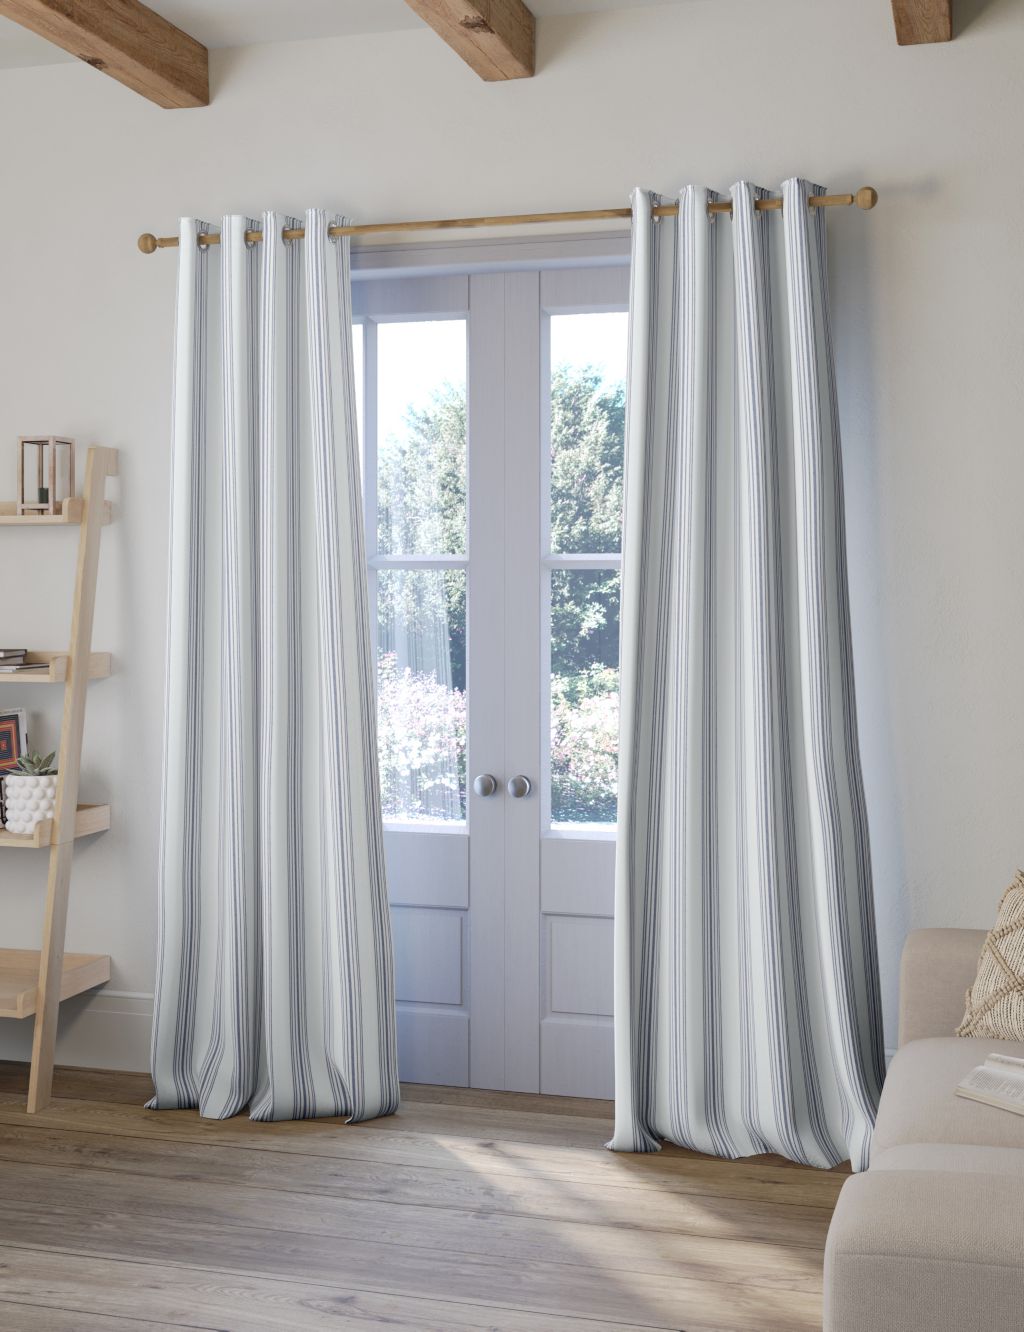 Woven Striped Eyelet Curtains image 1